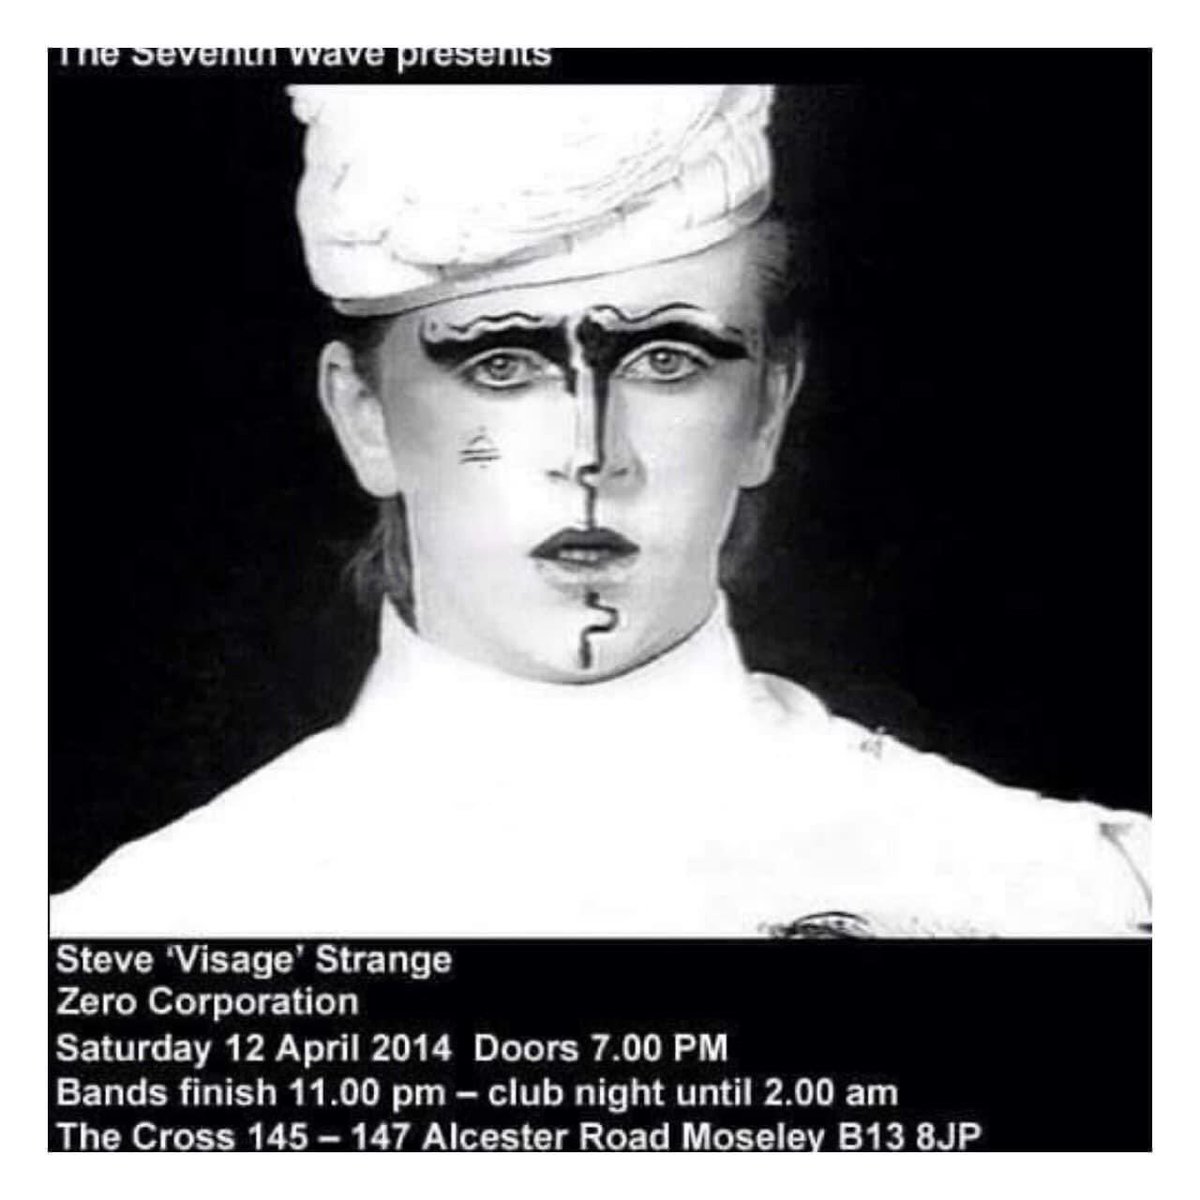 ZERO CORPORATION announce that the Club With No Name #Remix
In remembrance of #SteveStrange
Available  next week ! 
I was supposed to perform with him ten years ago😔 
#NewRomanticMovement 
#NewRomanticMusic
#NewRomantic  #BlitzClub  
#CWNN 
#Clubwithnoname 
#Cultwithnoname